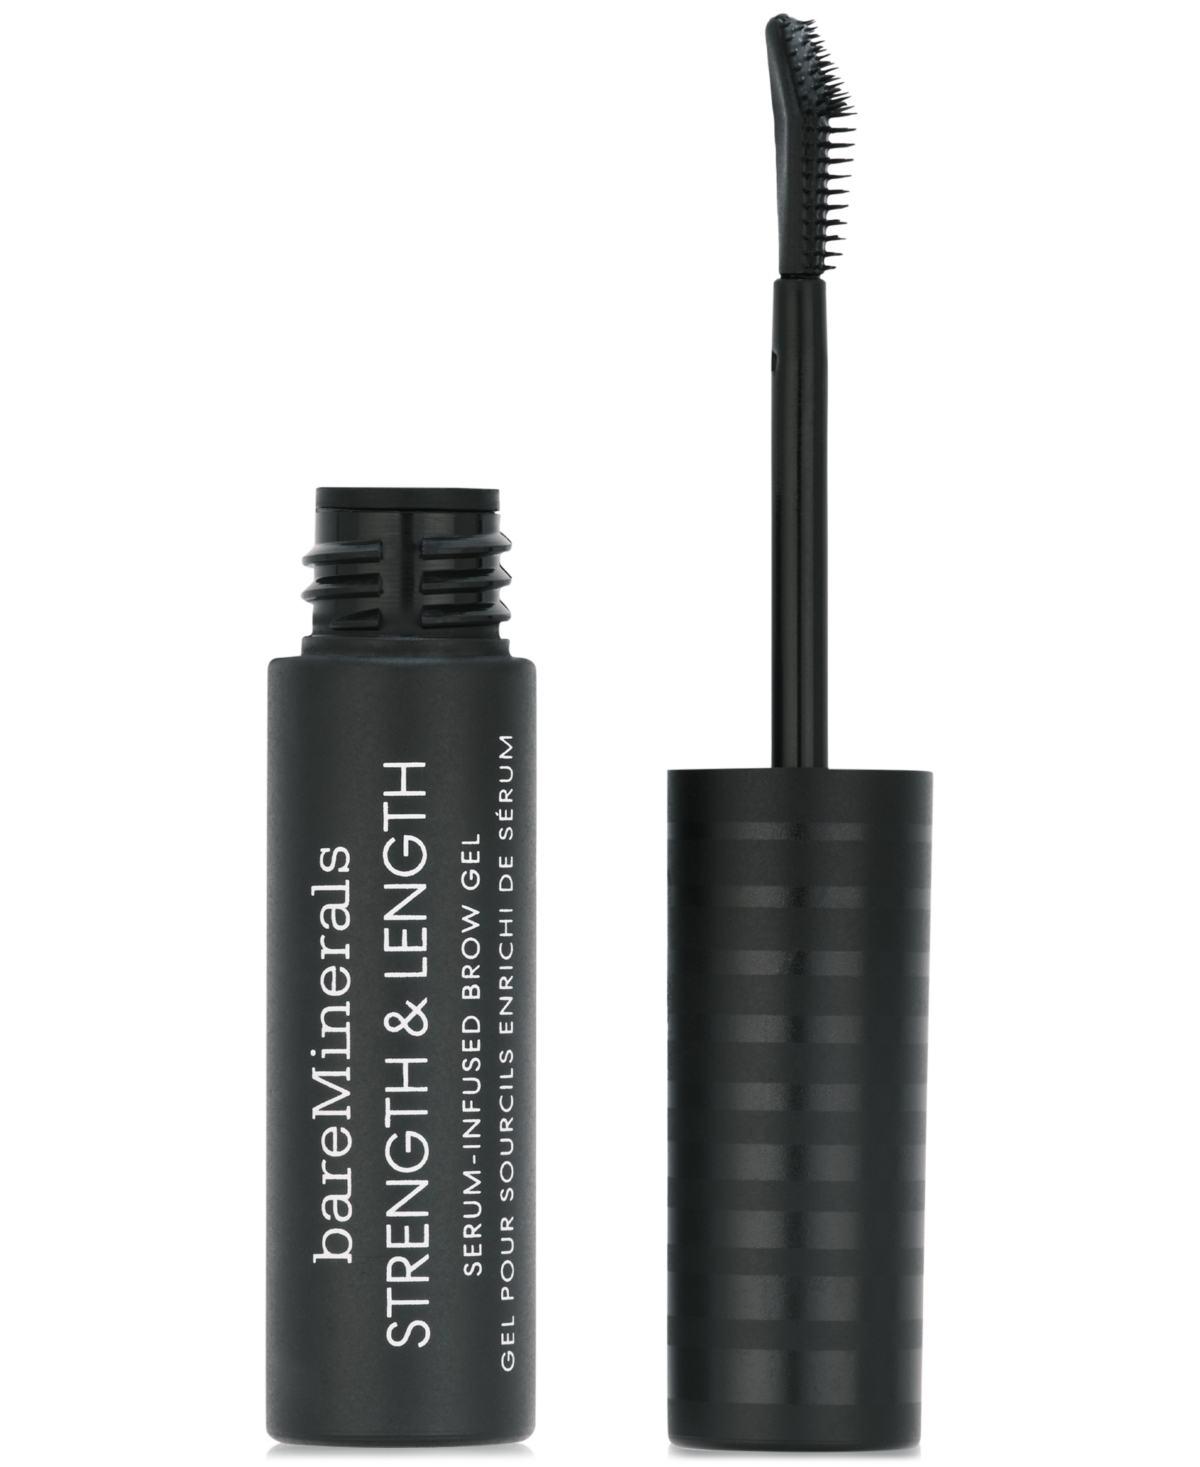 Bareminerals Strength & Length Brow Gel In Coffee